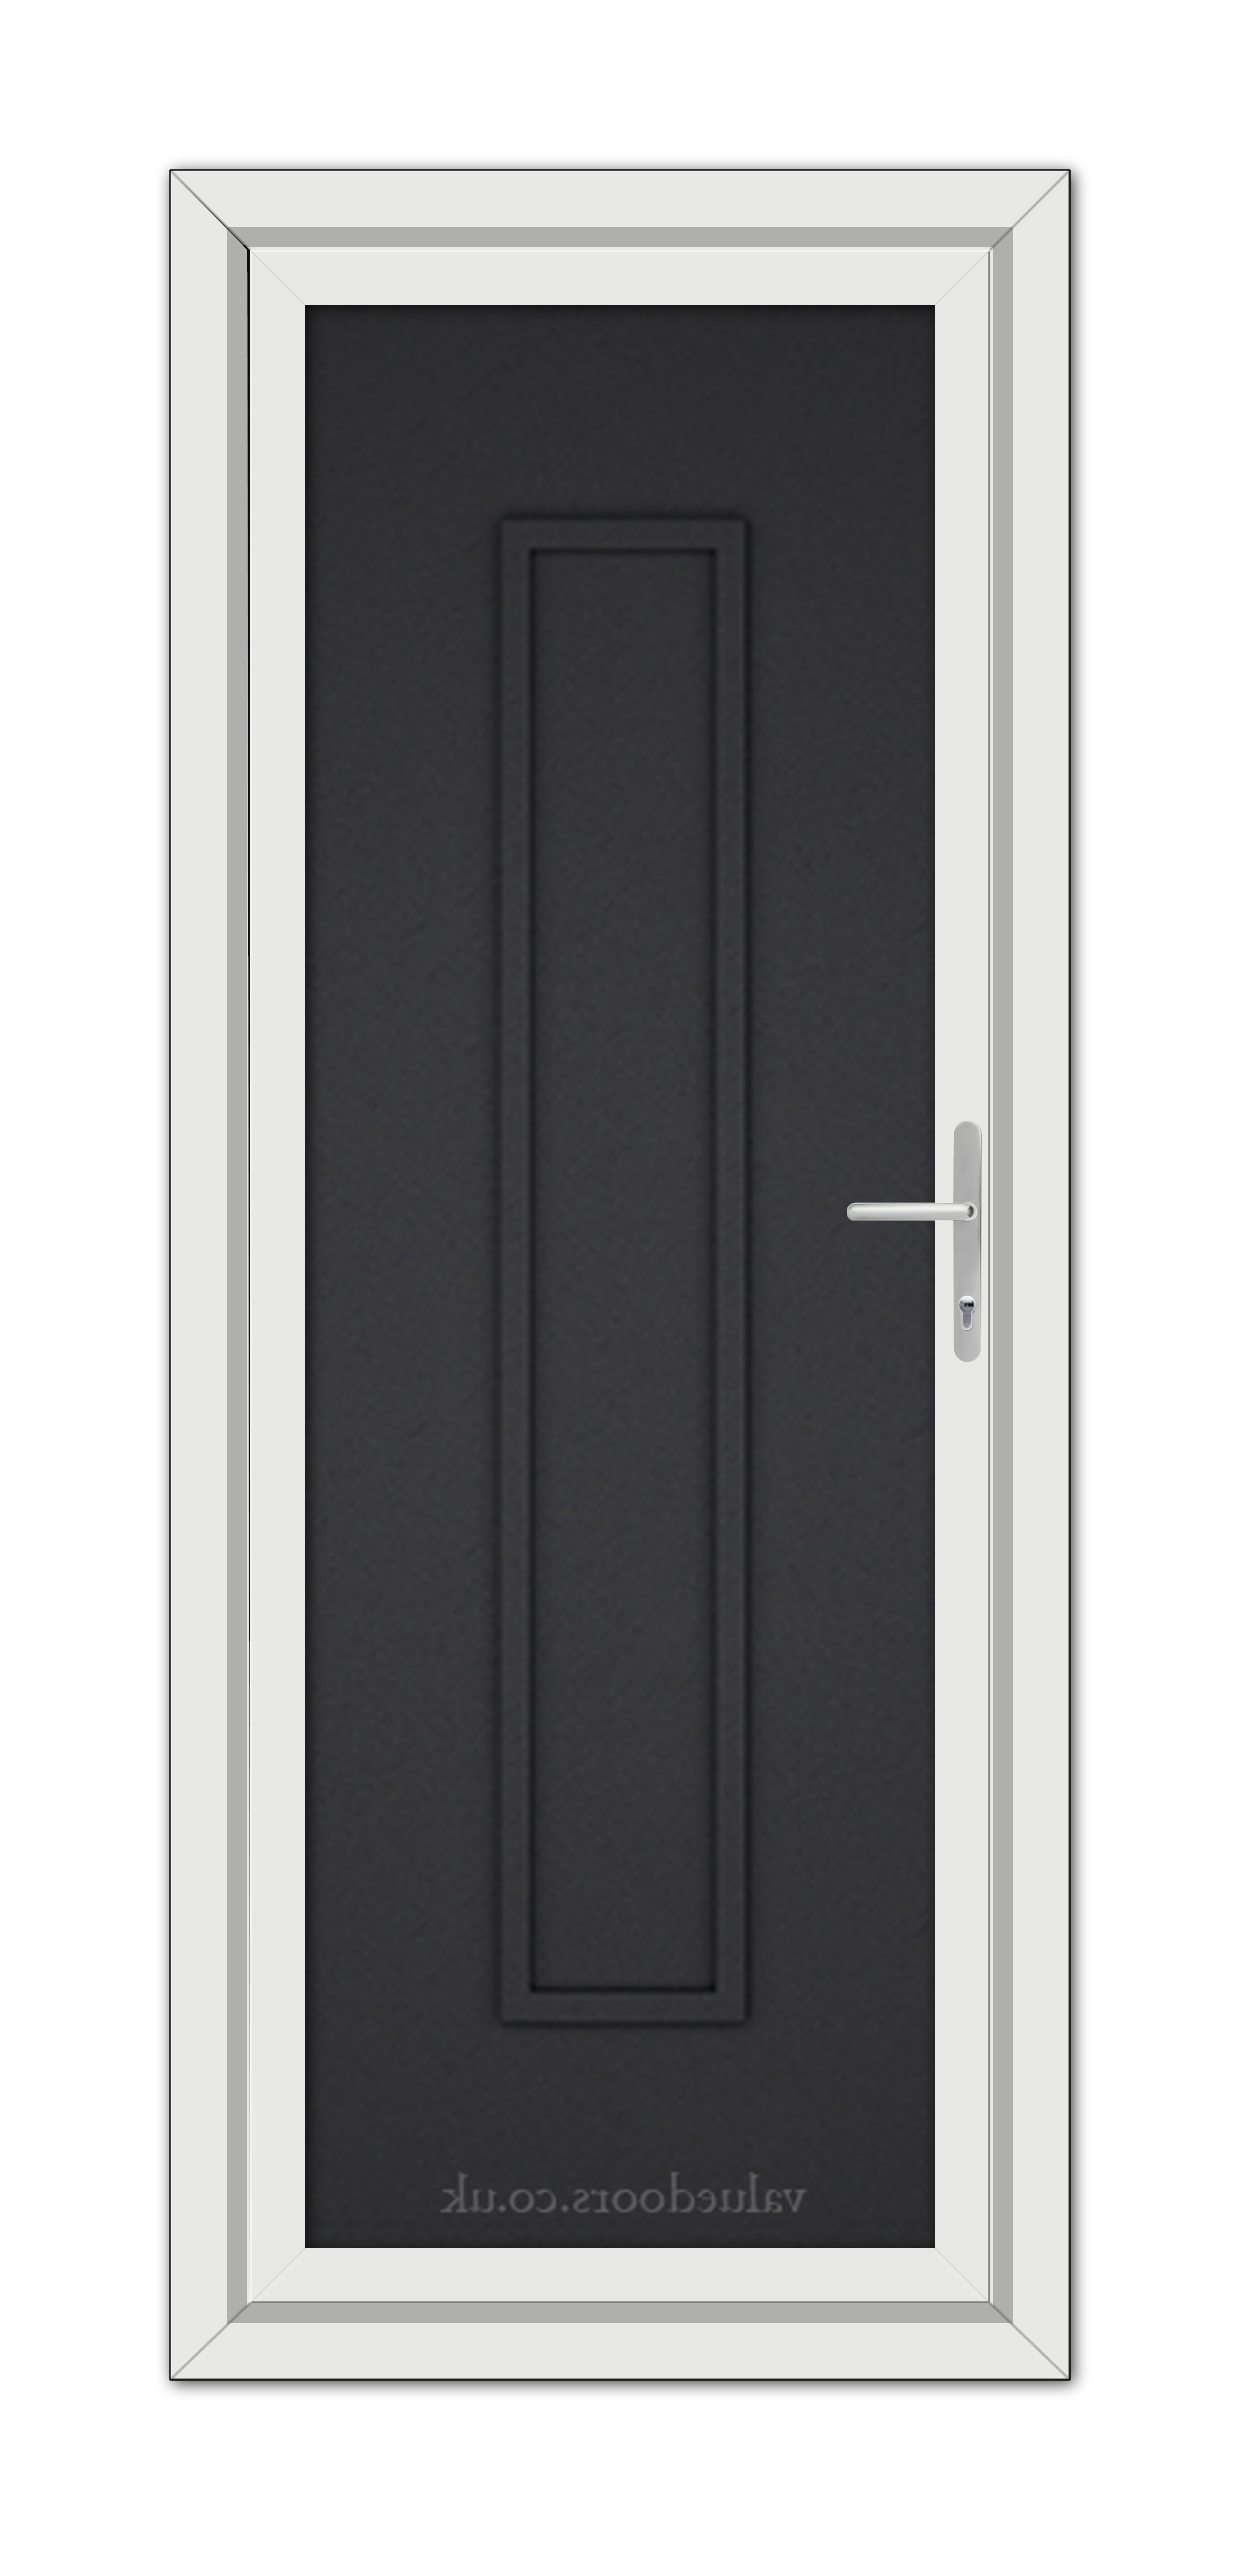 A modern, vertical, Black Brown Modern 5101 Solid uPVC door with a silver handle framed by a white door frame, all set against a white background.